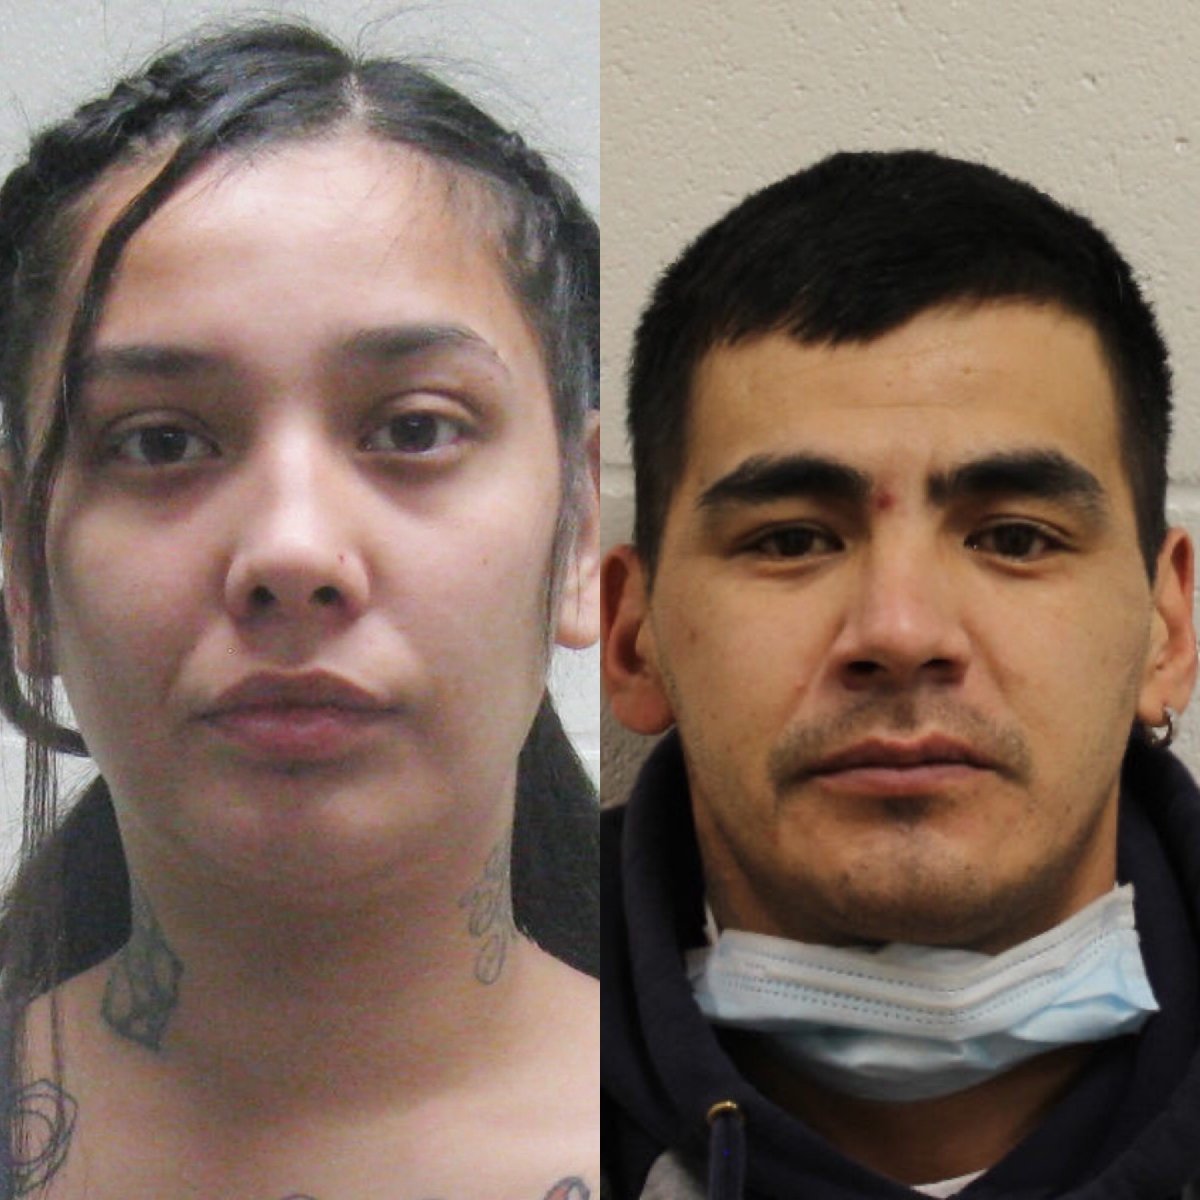 Celine Charles has outstanding with warrants for her arrest in relation to a dangerous person with firearm investigation in La Ronge. Allan Sanderson (right) has been arrested.